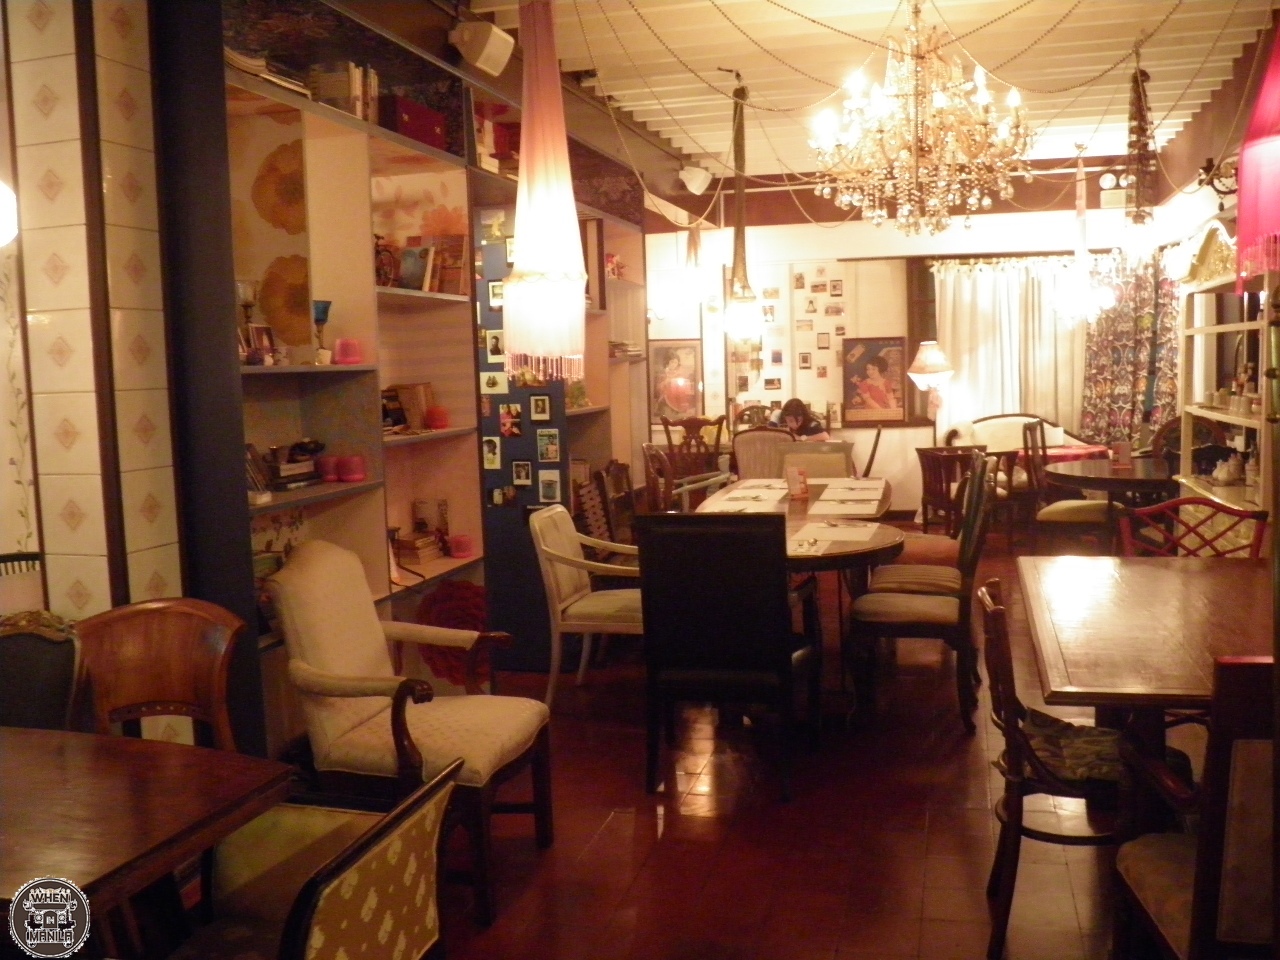 The Frazzled Cook: A Cozy and Relaxed Dining Experience Hidden Away ...